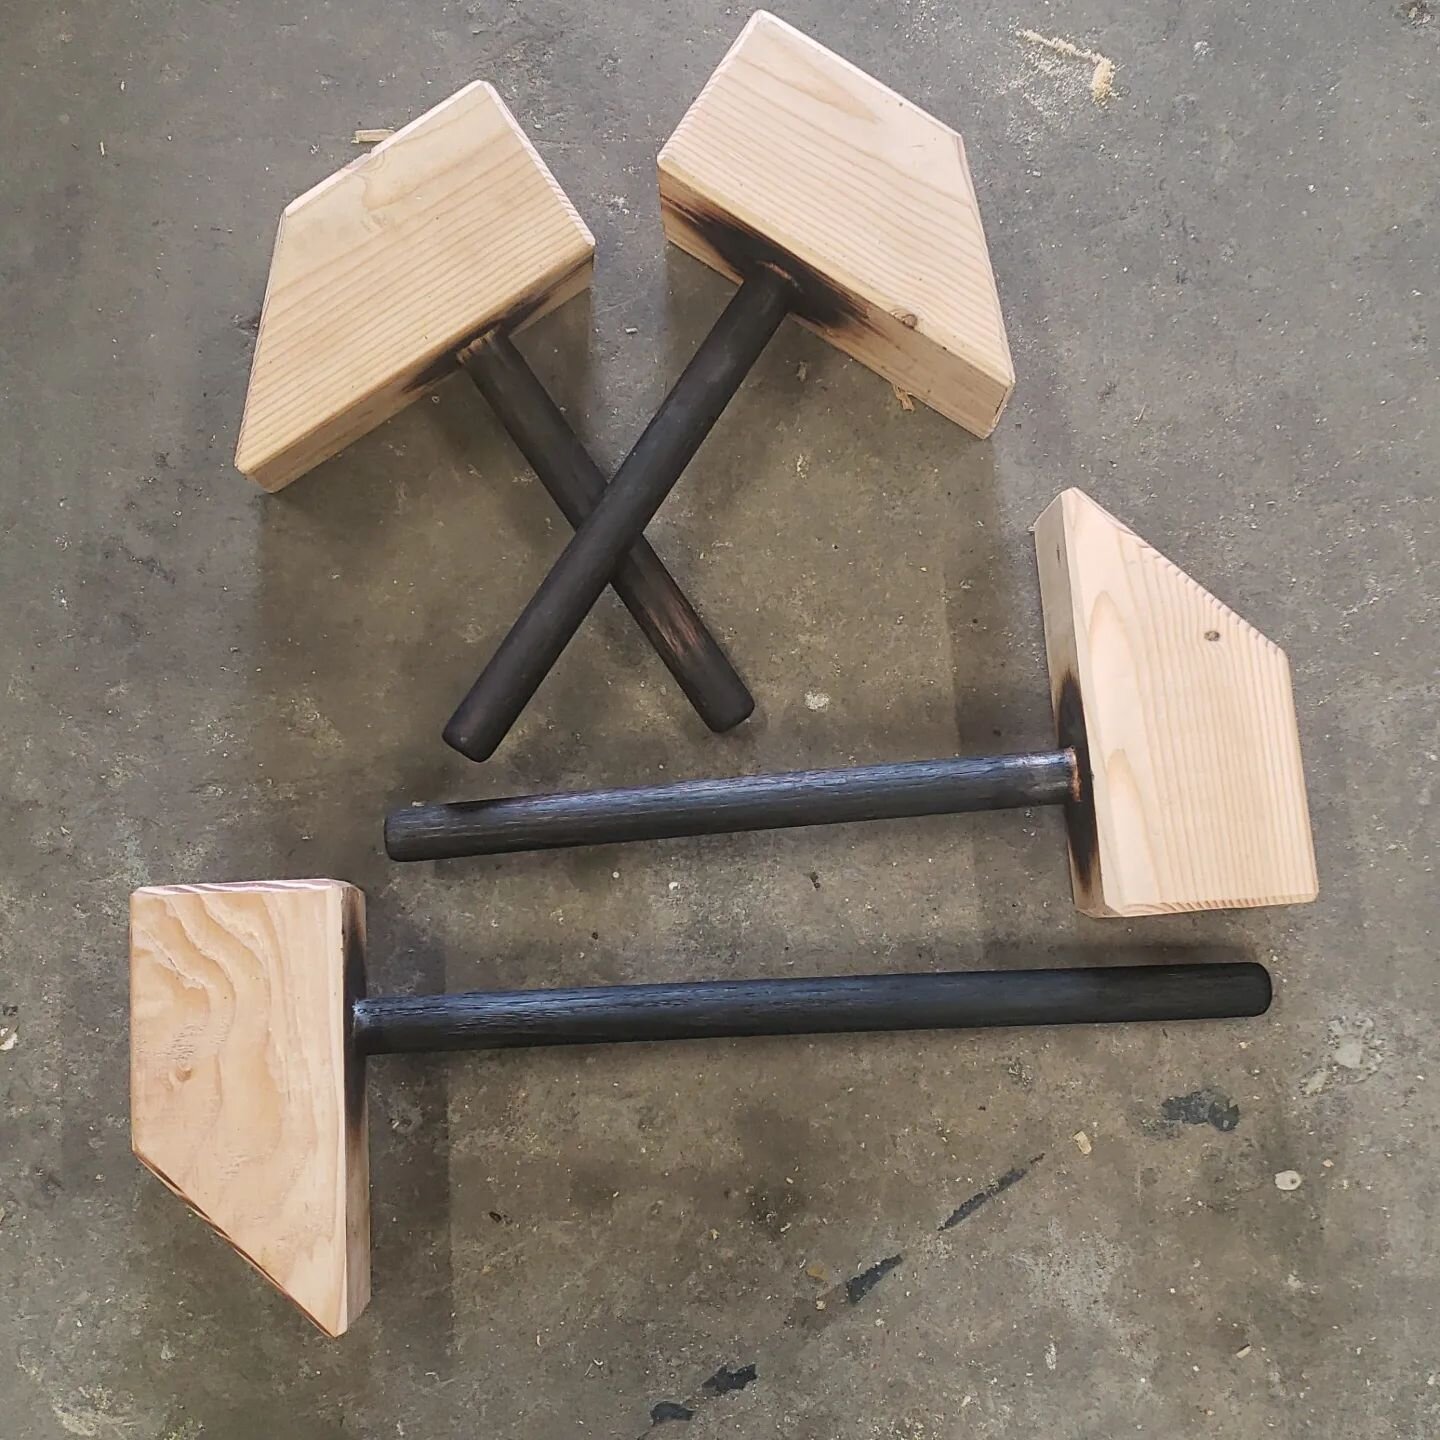 This morning in the shop I finally got around to making a new set of #WoodMallet. In the #BlacksmithShop, wood mallets are use for making adjustments to hot steel without marring the surface. This is a very simple design with just an oak dowl set int